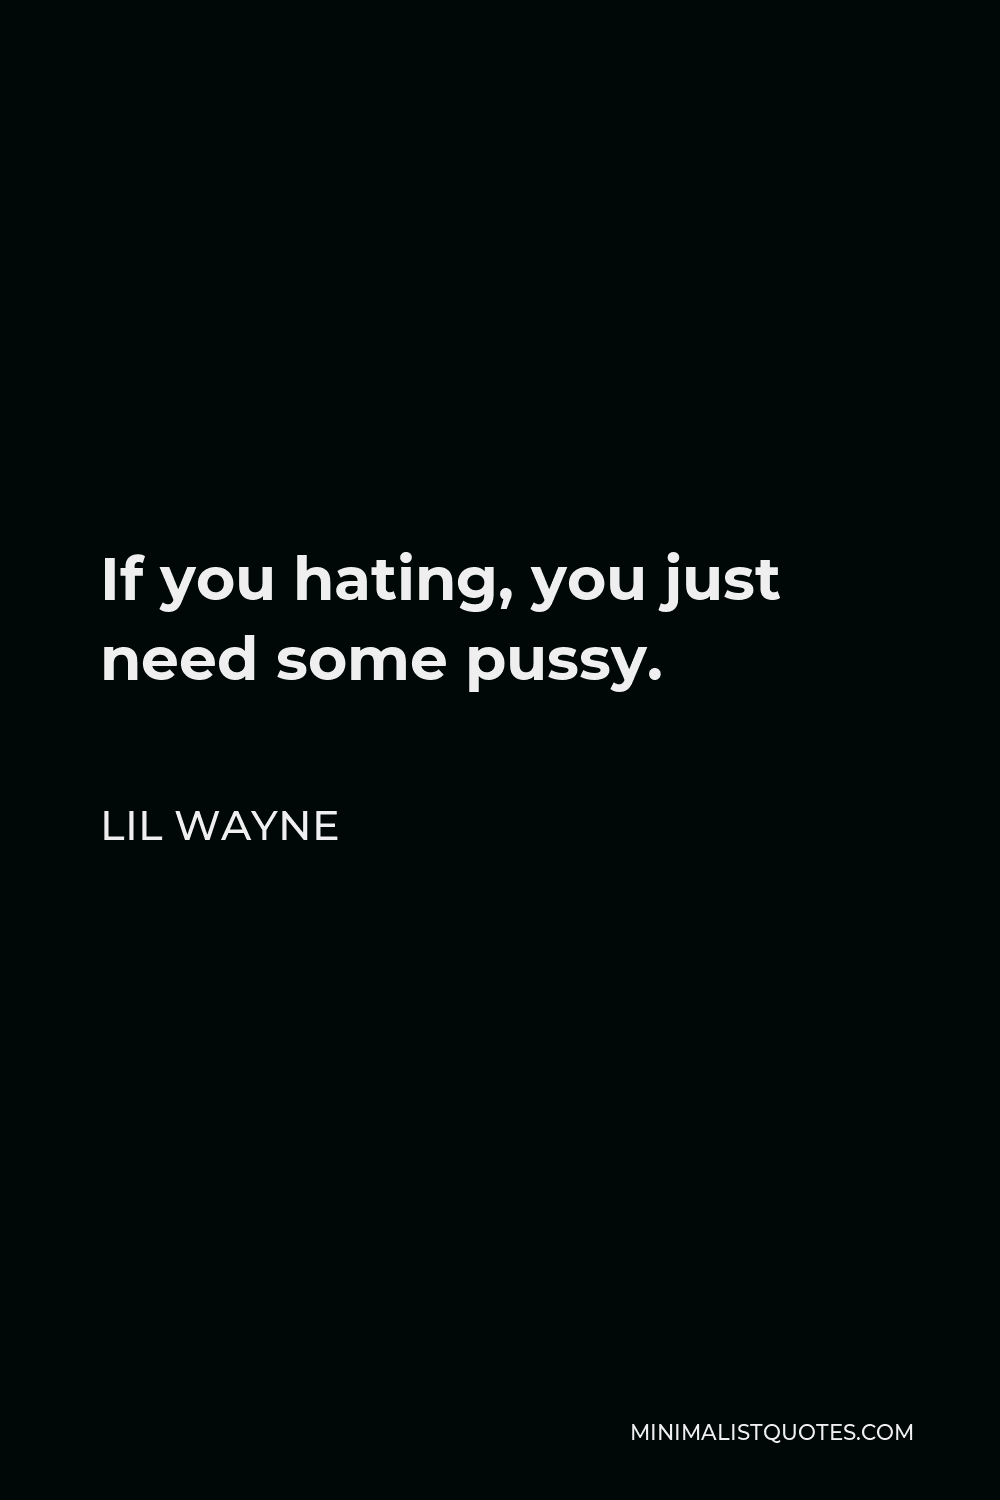 Lil Wayne Quote - If you hating, you just need some pussy.